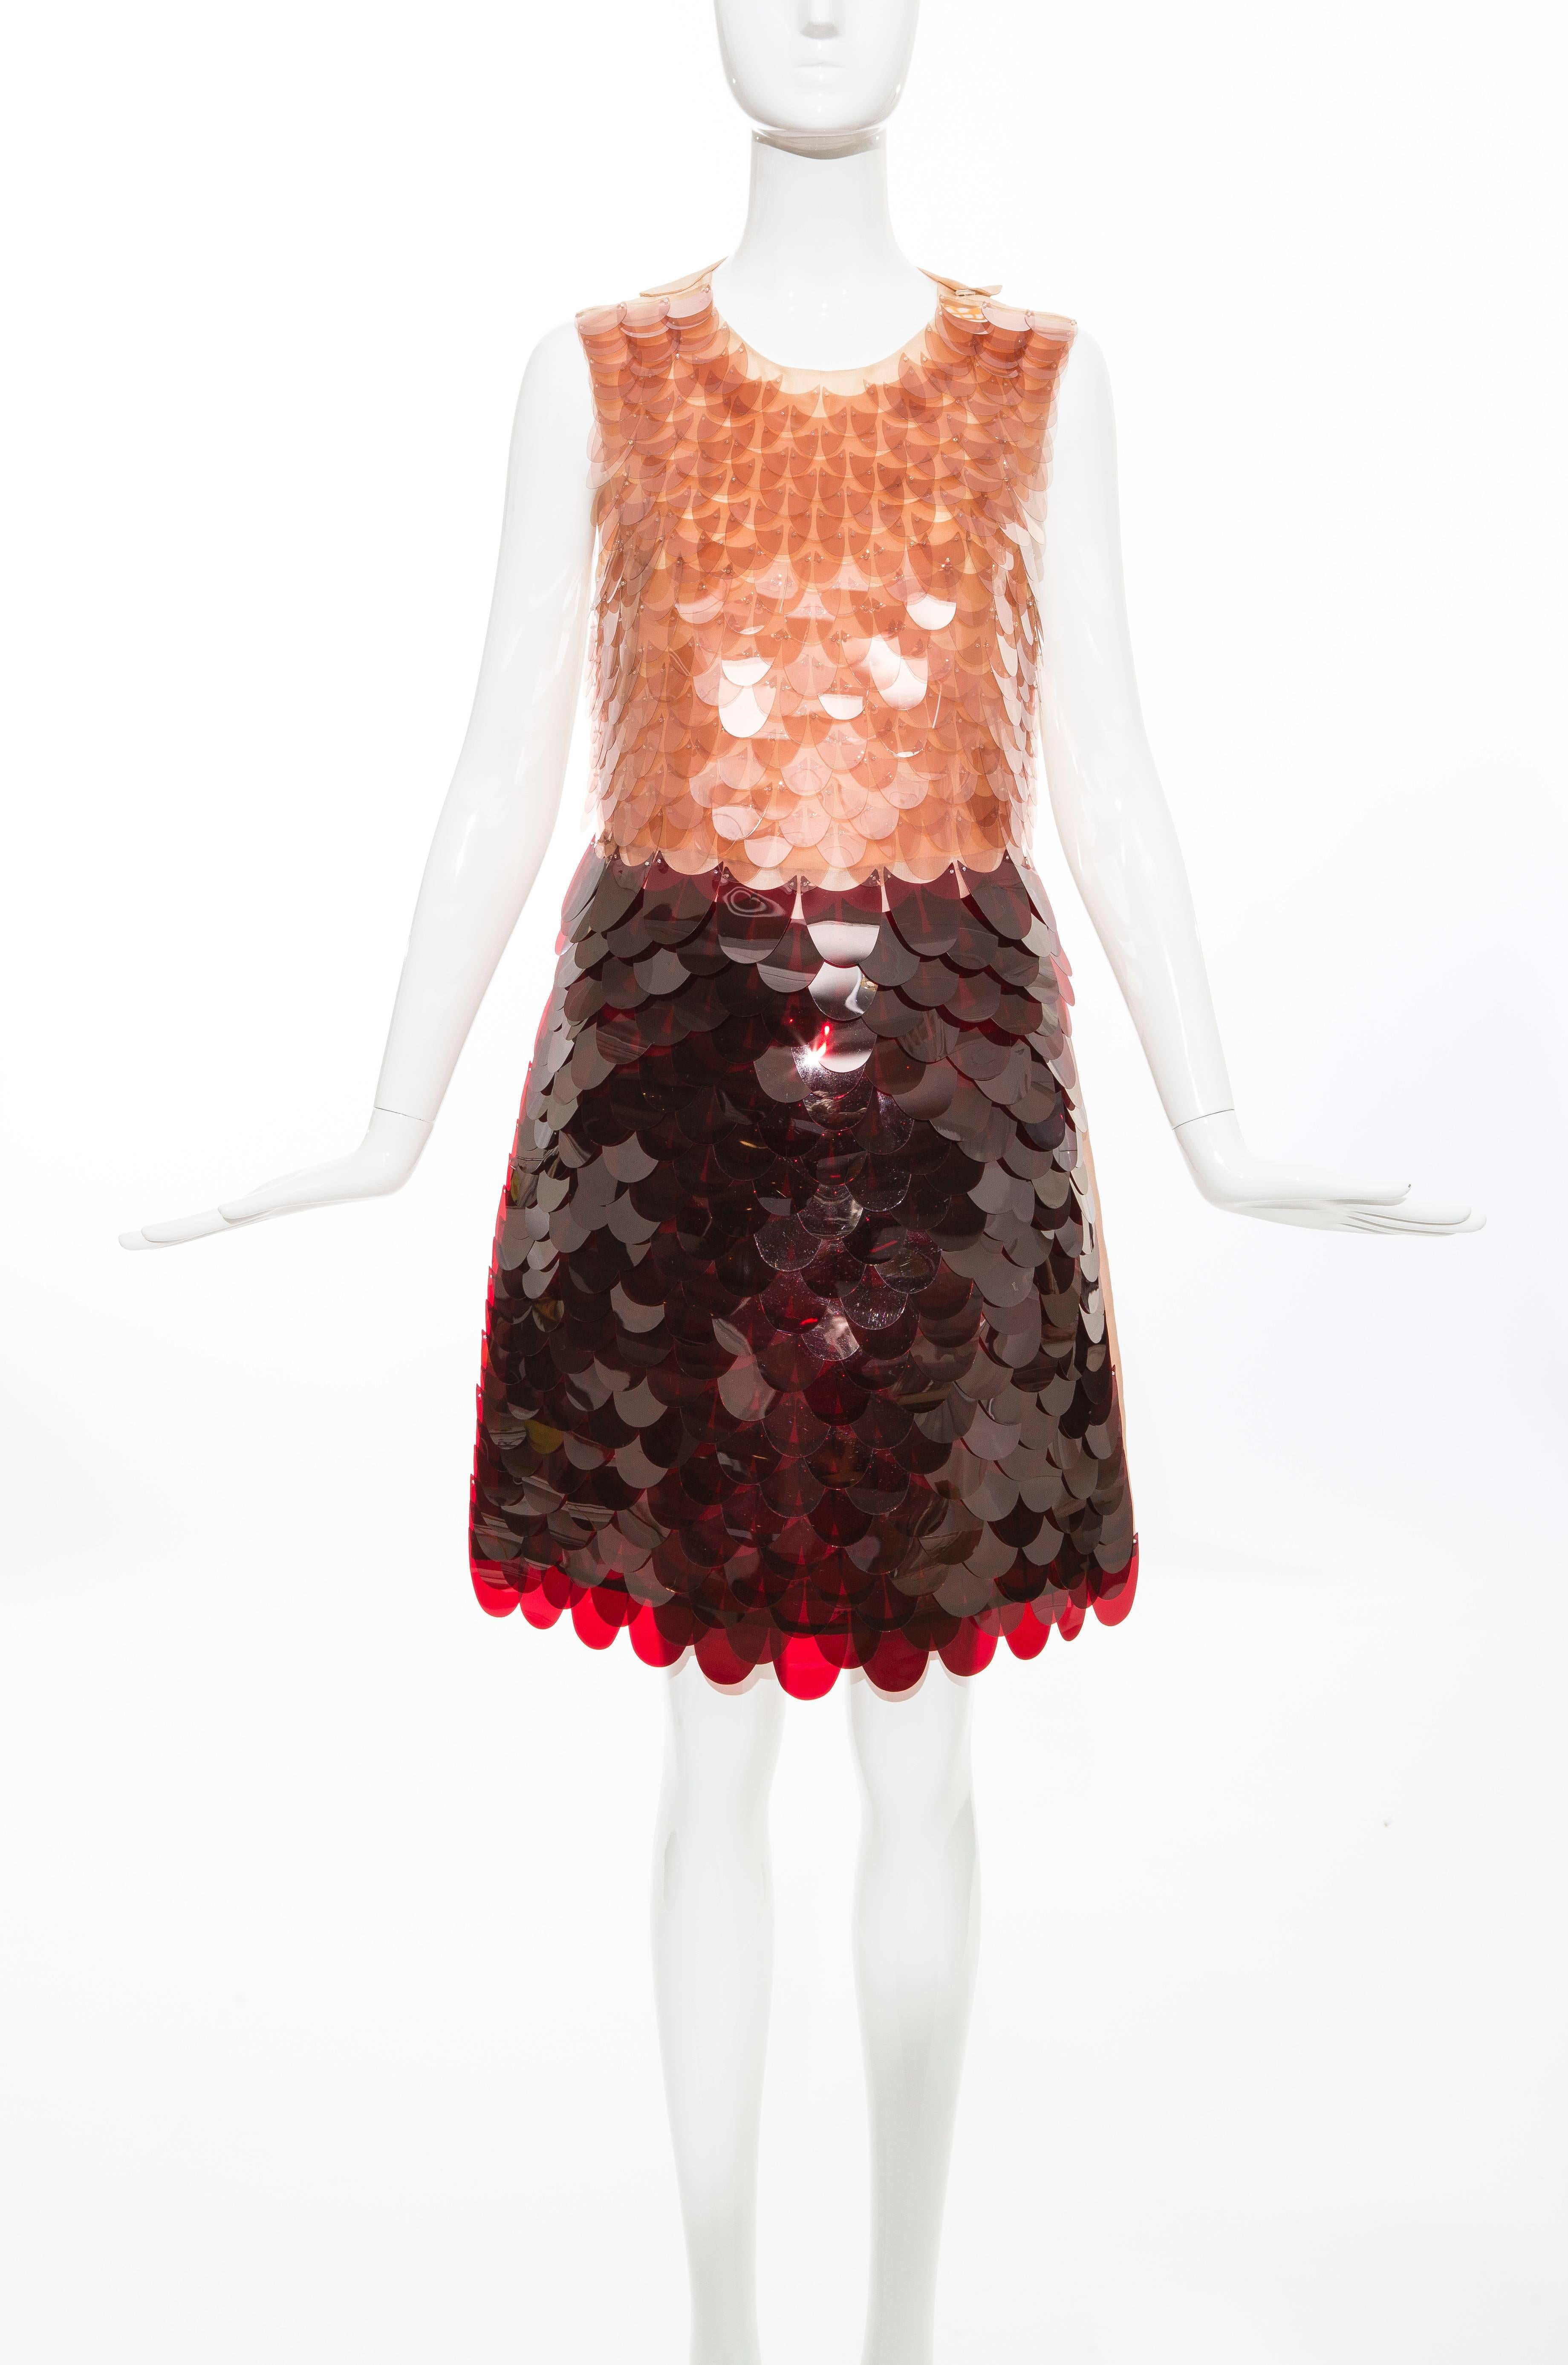 Prada, Autumn-Winter 2011, sleeveless dress with paillettes, side zip, scoop back and fully lined. 

The dress was on the cover of Vogue magazine with Emma Watson, July 2011 and exhibited at the Met's Spring 2012 Costume Institute exhibition,